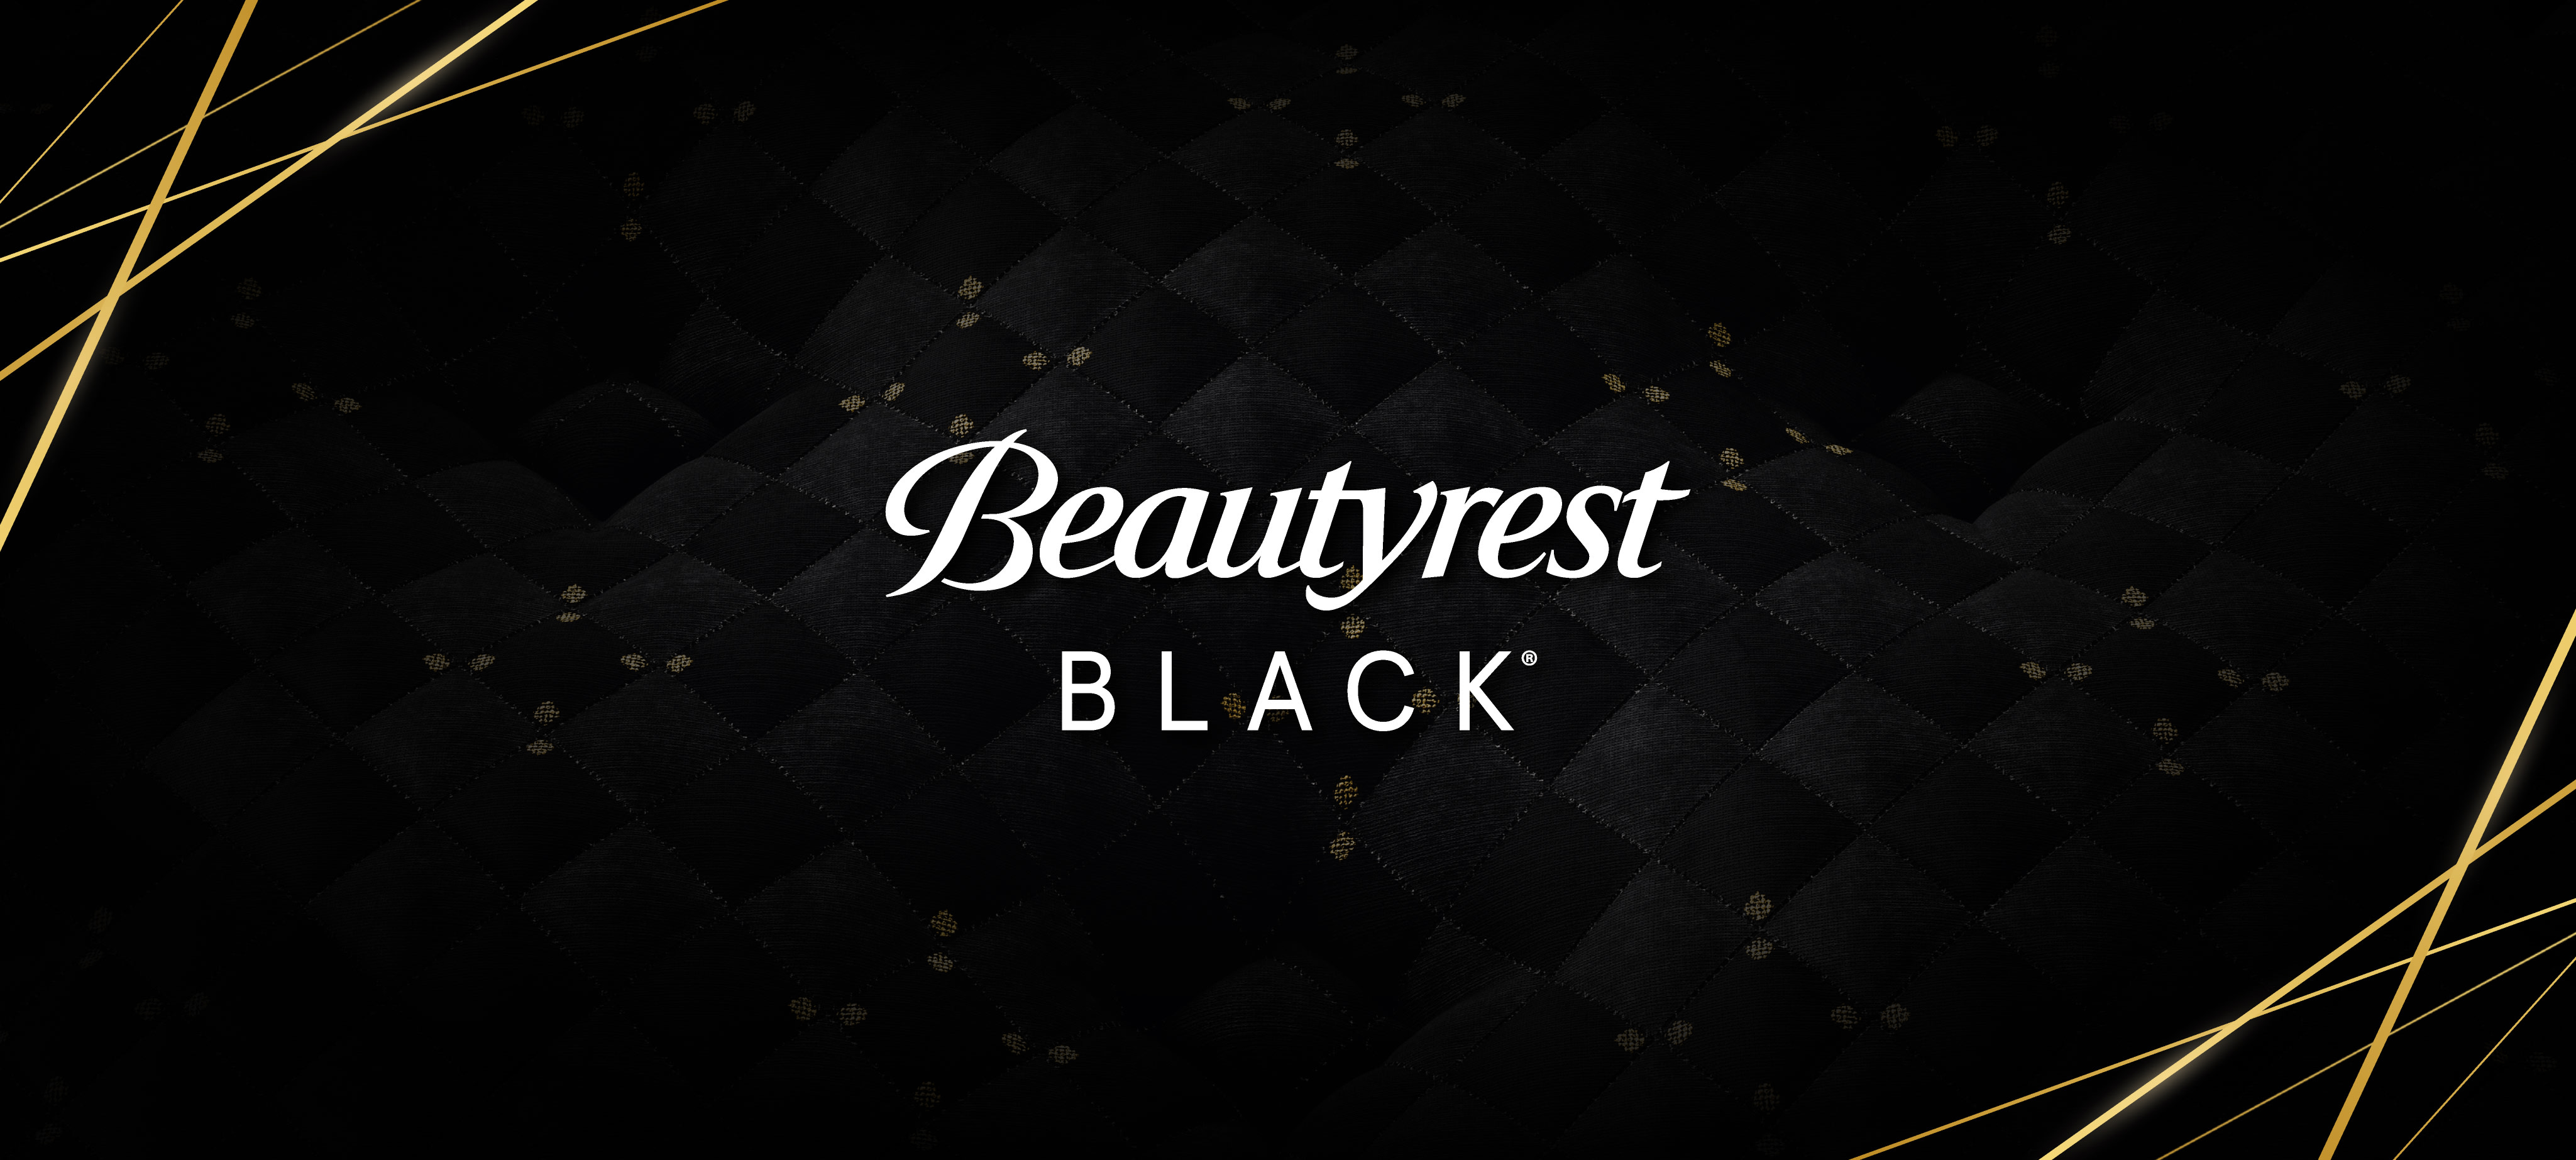 A closeup image of the black cloth with gold detailing on the top of Beautyrest Black mattresses. The Beautyrest Black logo is overlaid on the image.